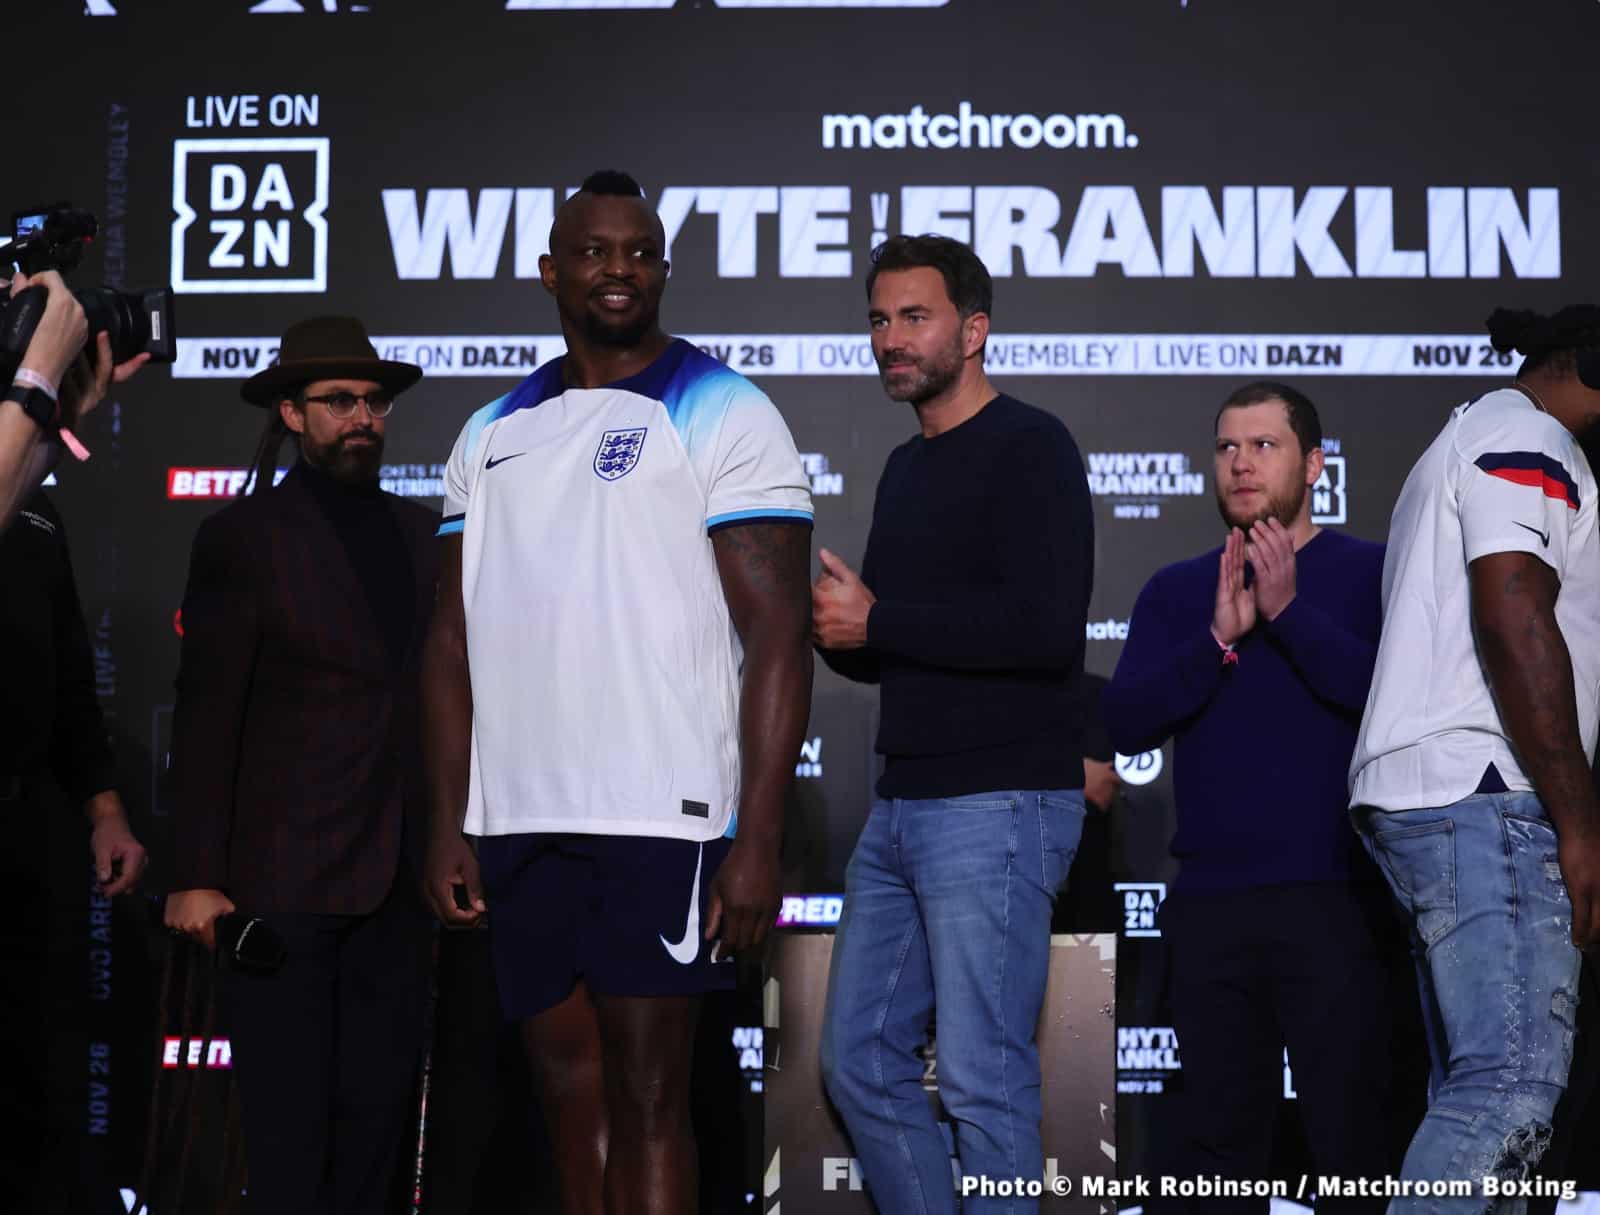 Image: Dillian Whyte 251 vs. Jermaine Franklin 257 - weigh-in results